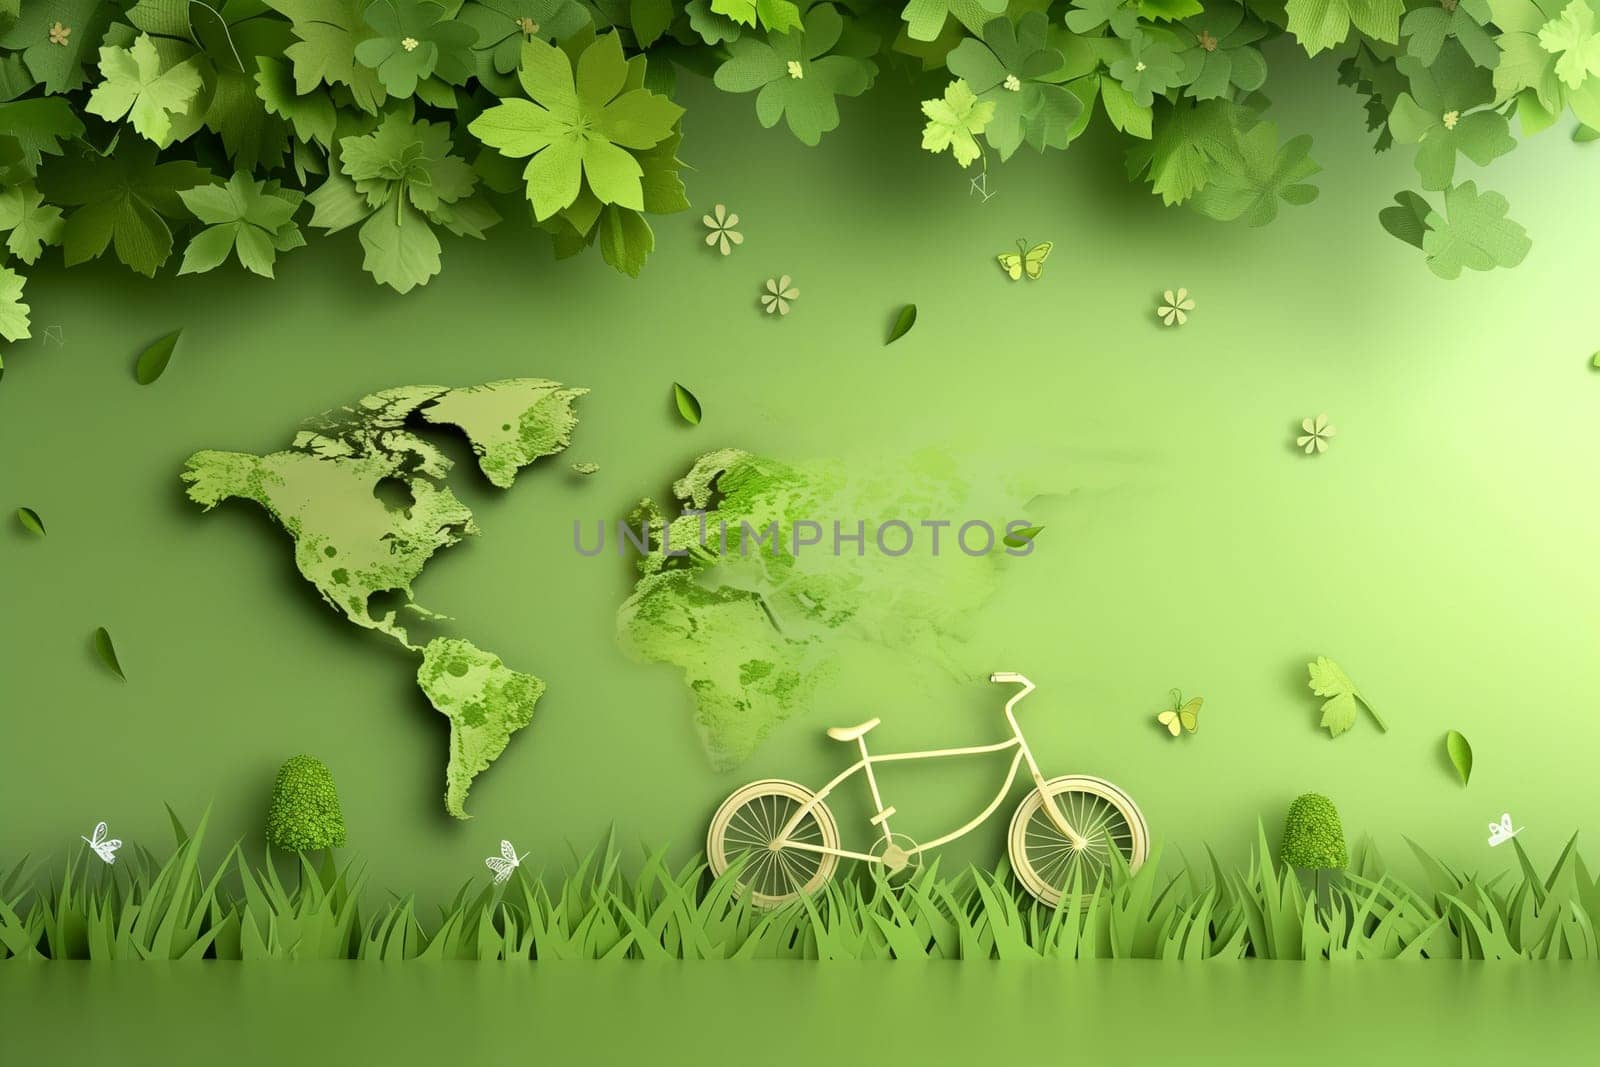 Green Background With Bicycle and World Map by Sd28DimoN_1976